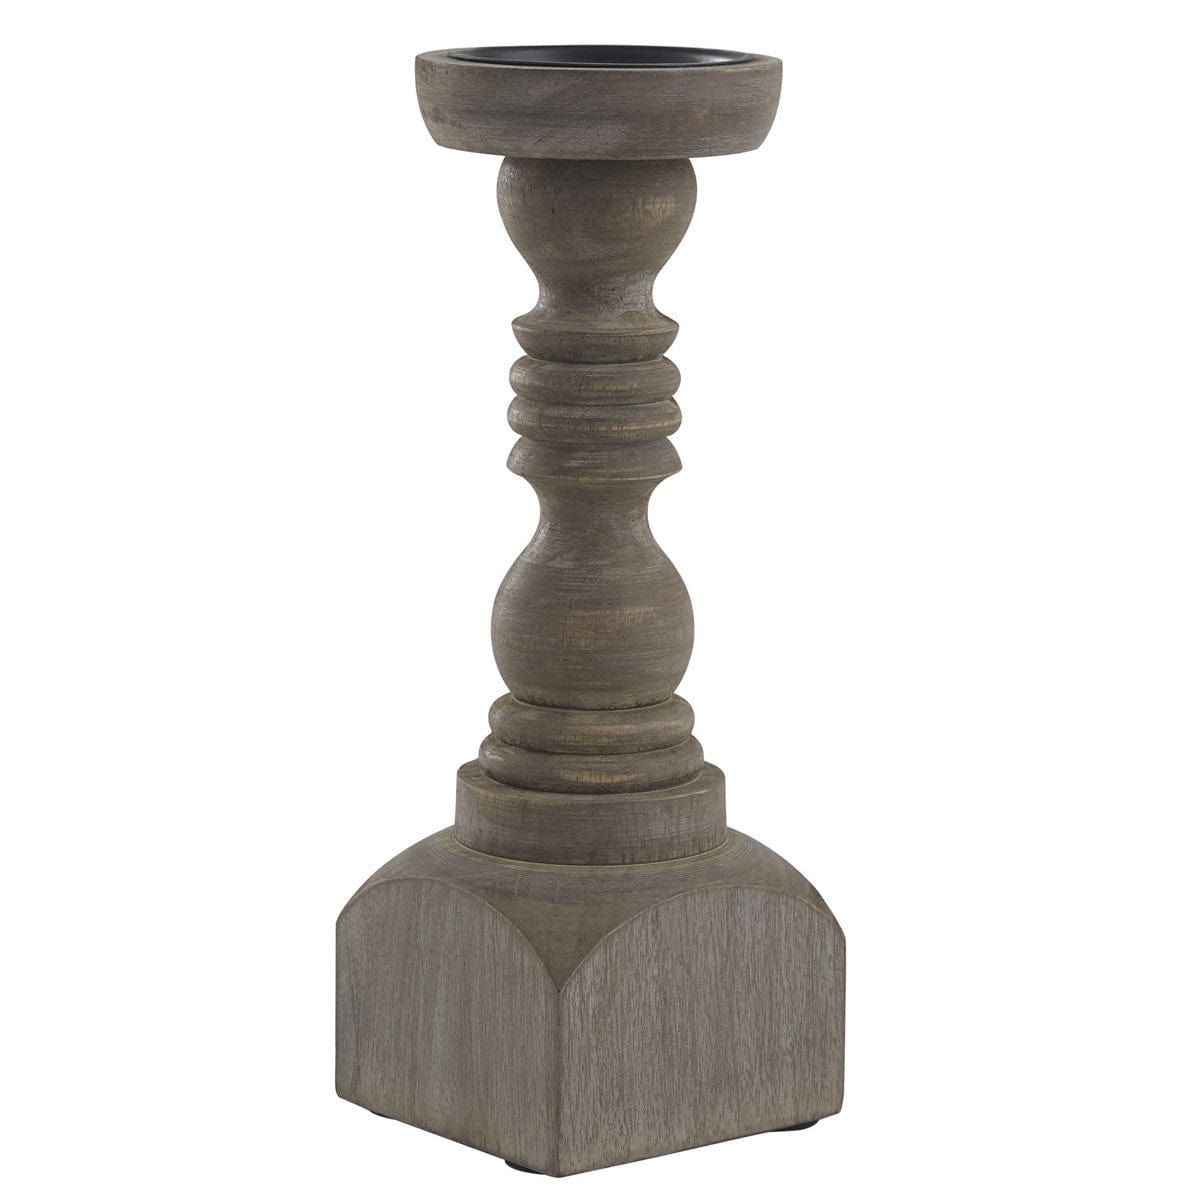 Wood Brighton Candlestick Candle Holder For Pillar Candles - 12" High-Park Designs-The Village Merchant